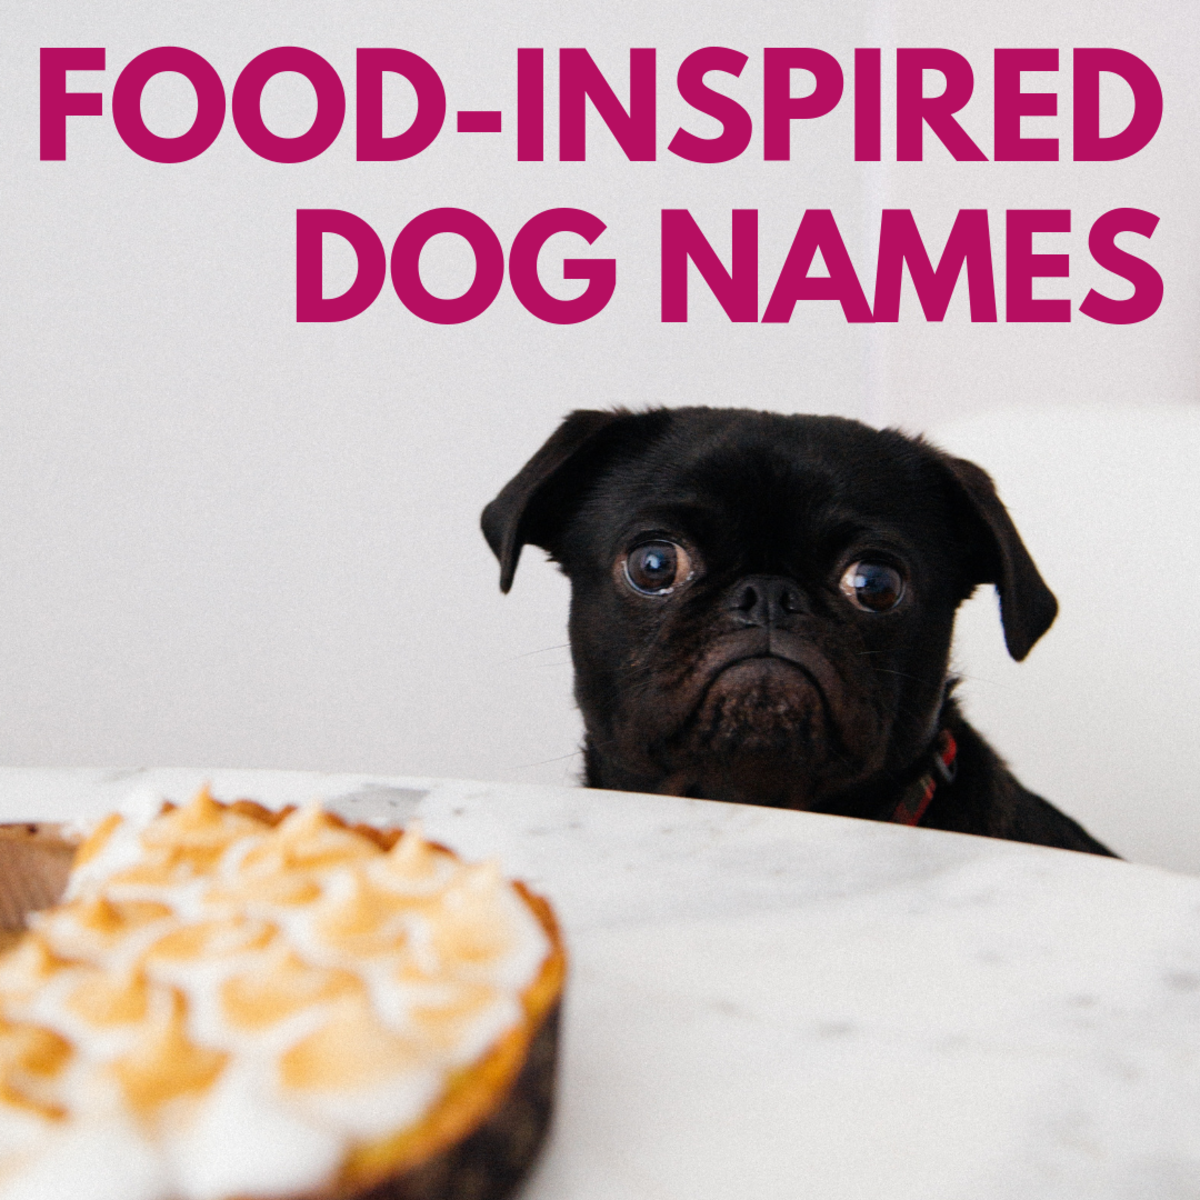 Food-inspired dog names, for foodies!